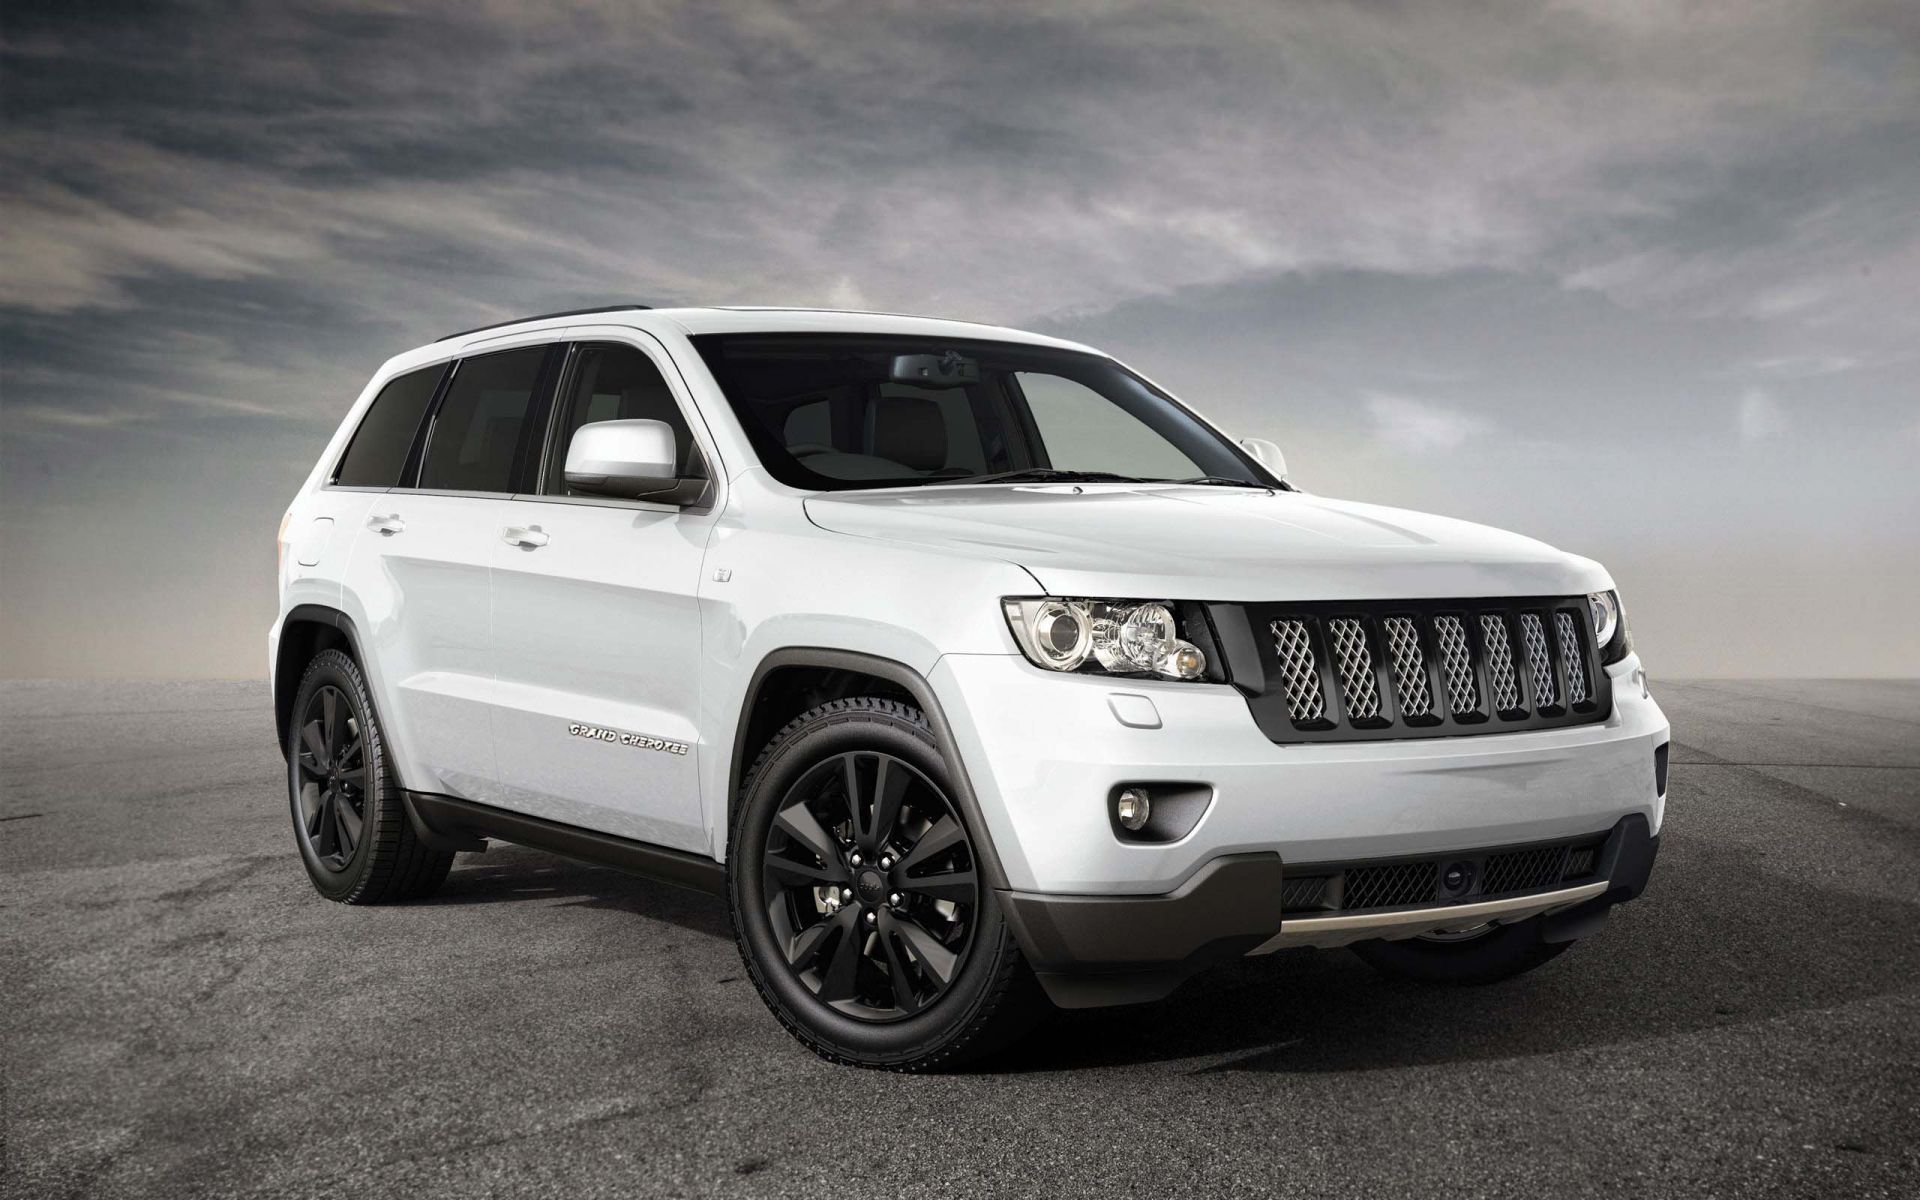 Jeep Grand Cherokee. HD Jeep Wallpaper for Mobile and Desktop